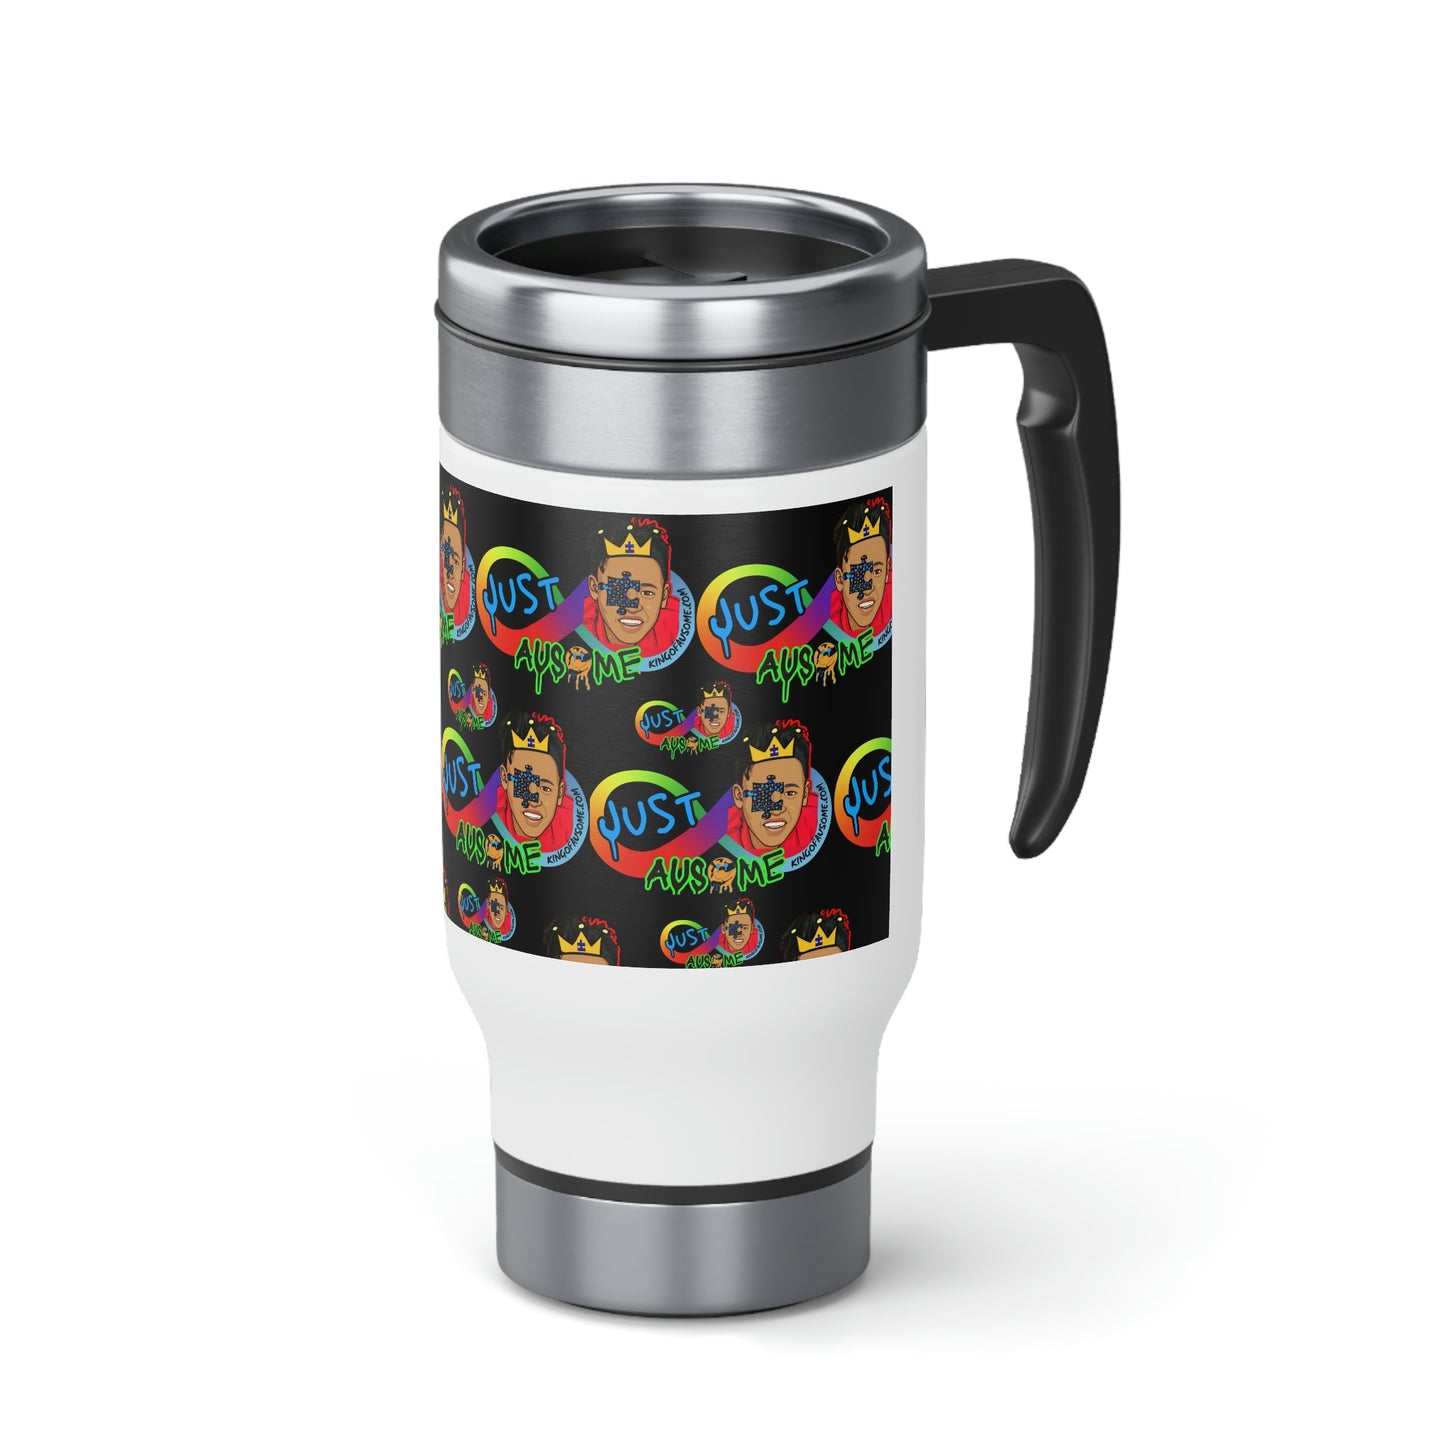 JUST AUSOME~Stainless Steel Travel Mug with Handle, 14oz